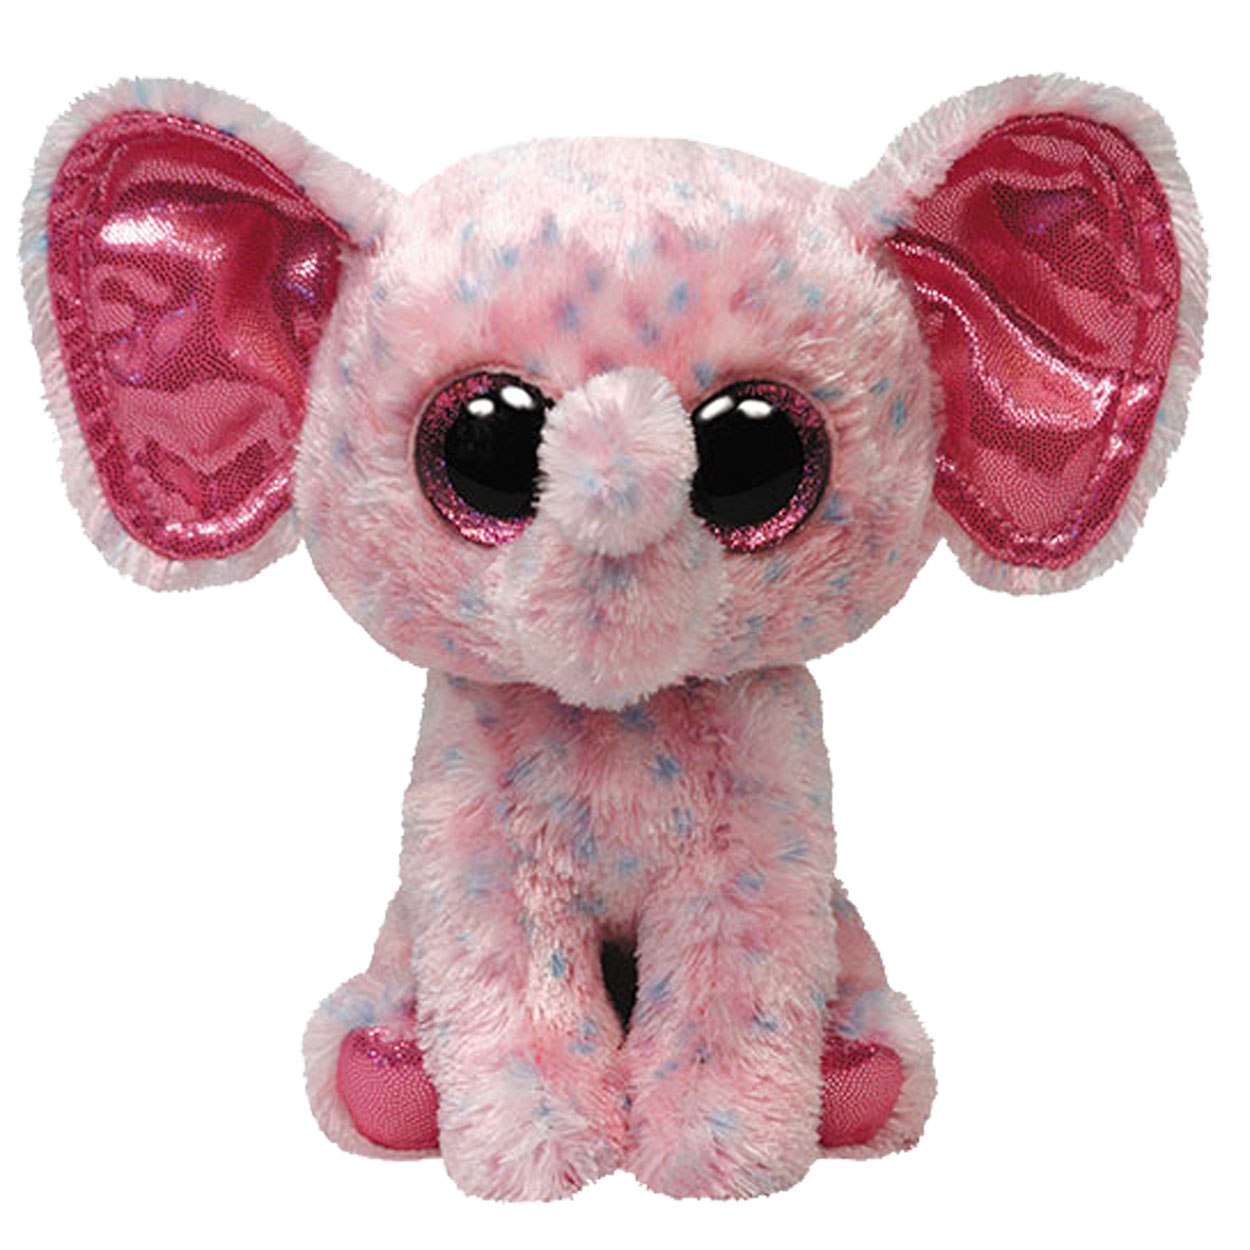 gevogelte taart Trouwens Ty Beanie Boo Roze Olifant Knuffel | Thimble Toys